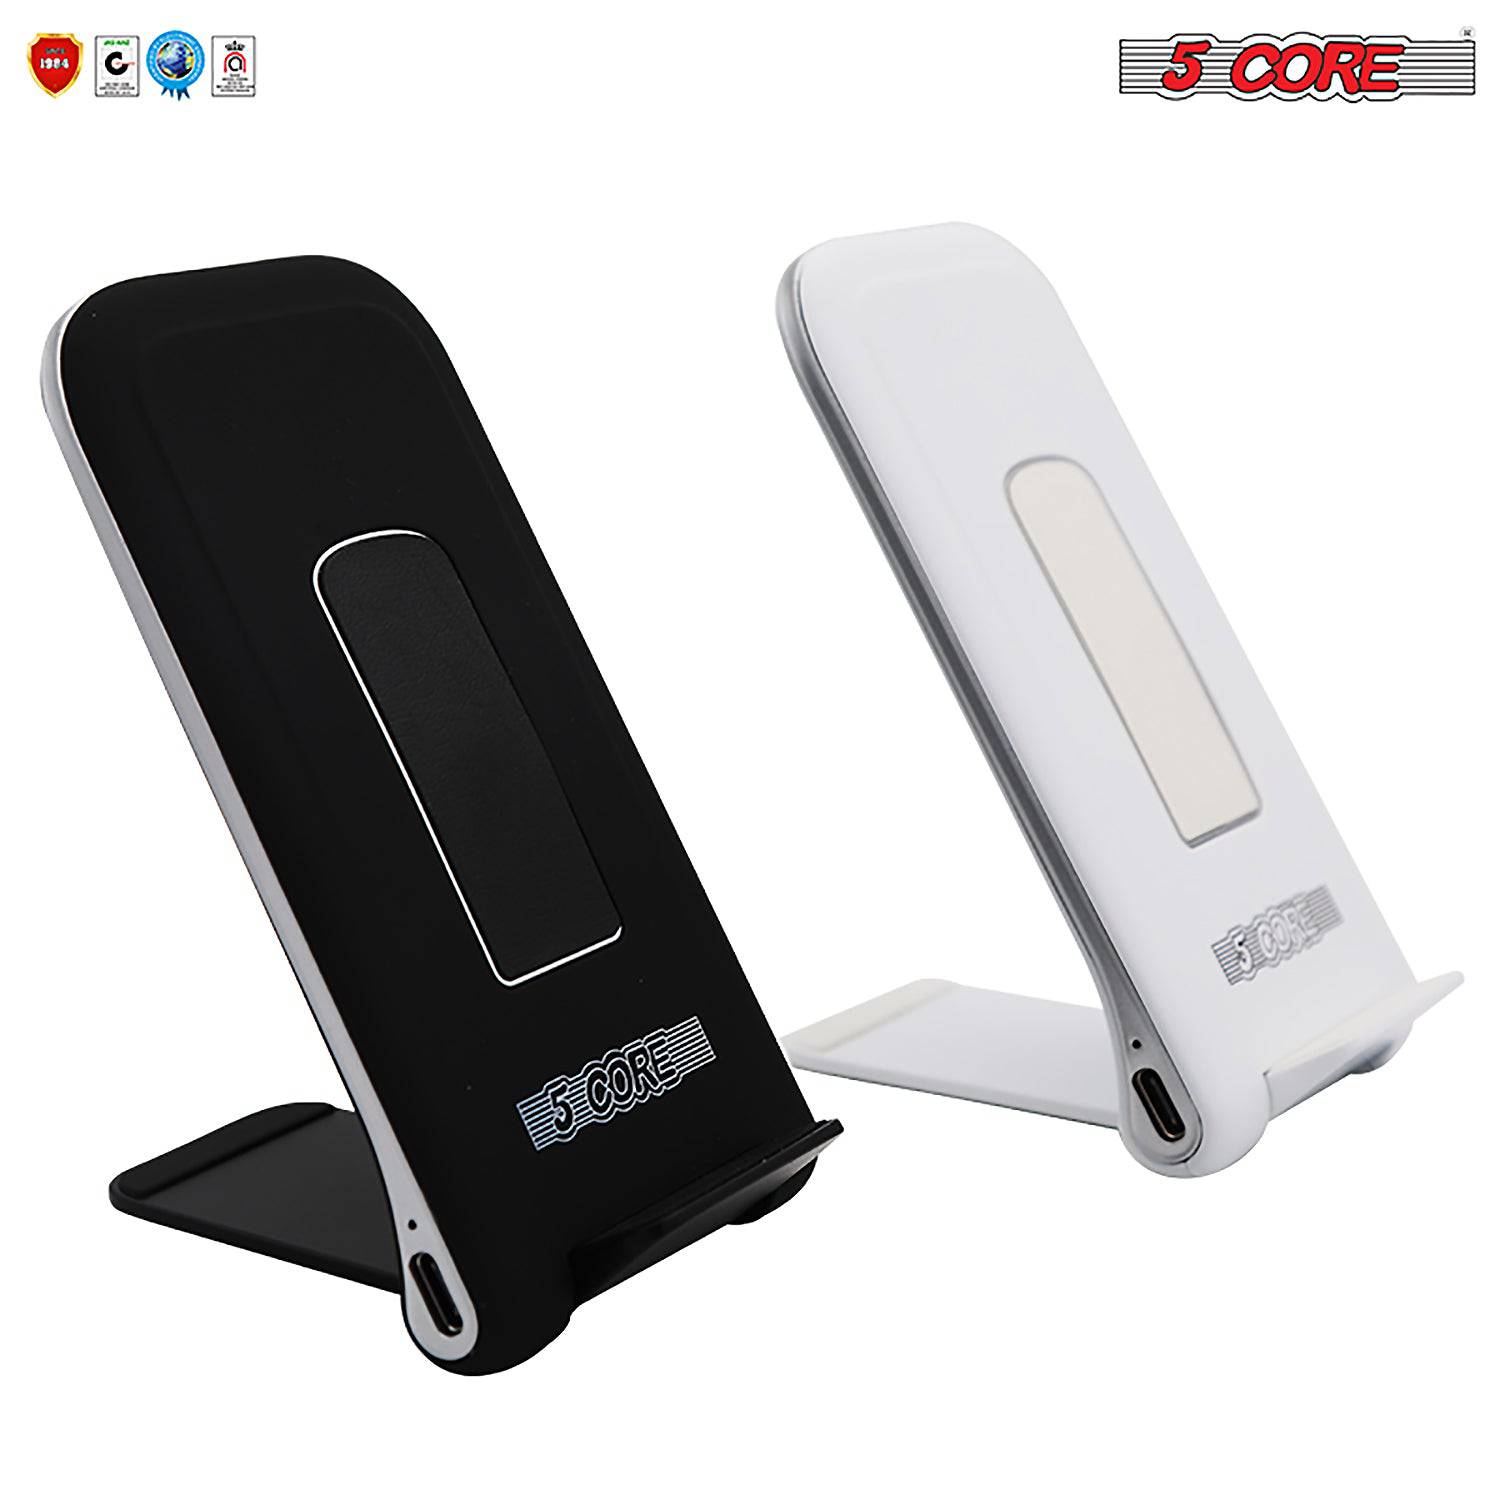 5 Core Wireless Fast Charge Stand Black & White Pair Dock Phone